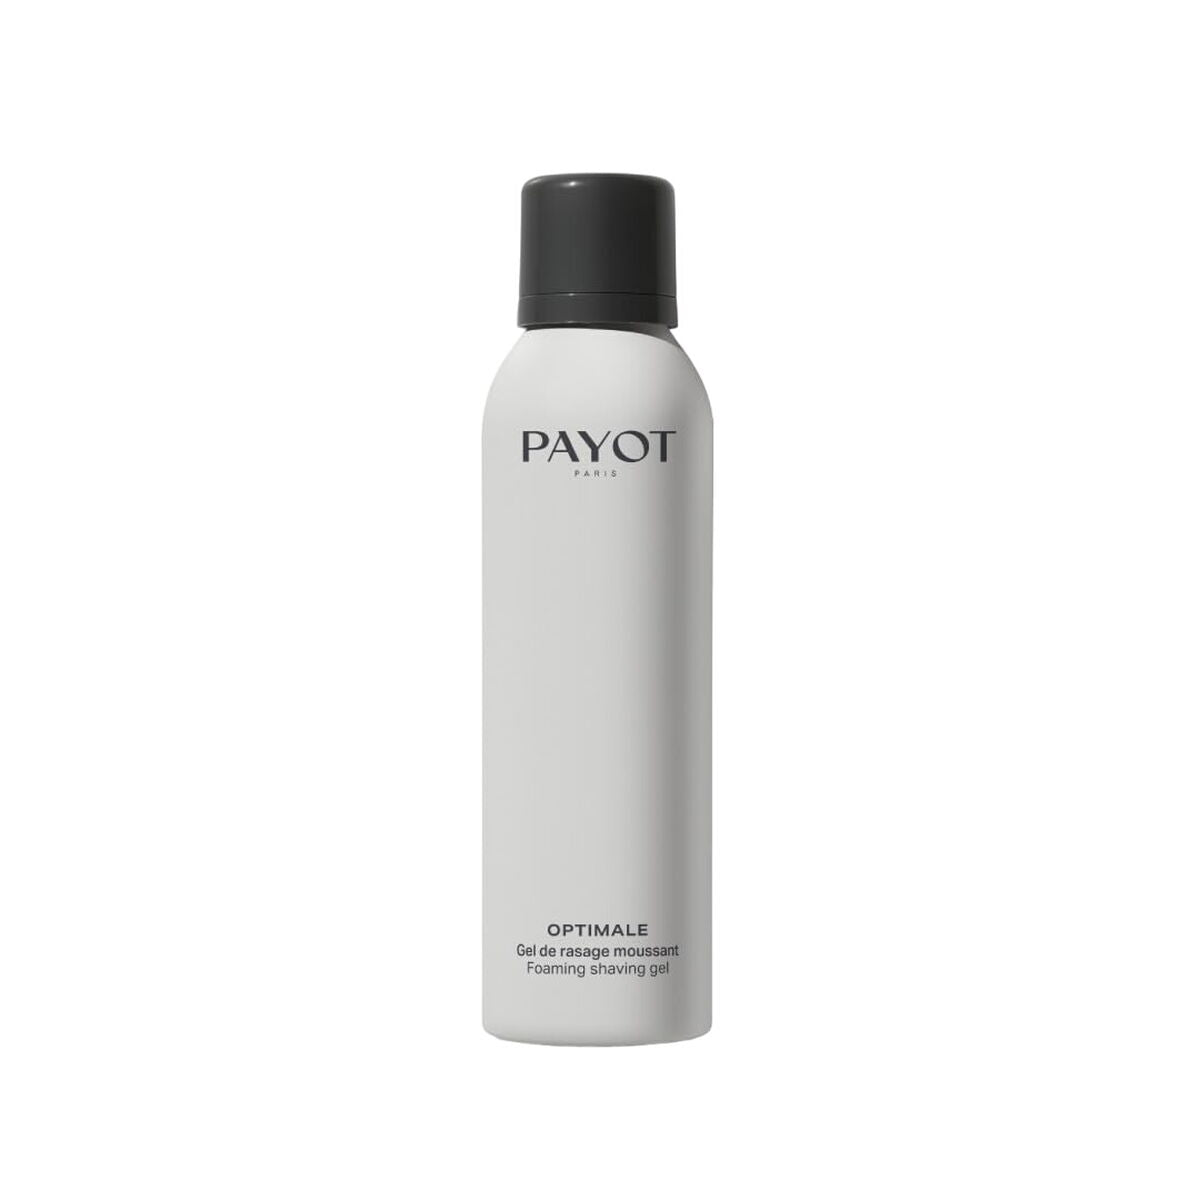 Aftershave Lotion Payot Optimale 150 ml